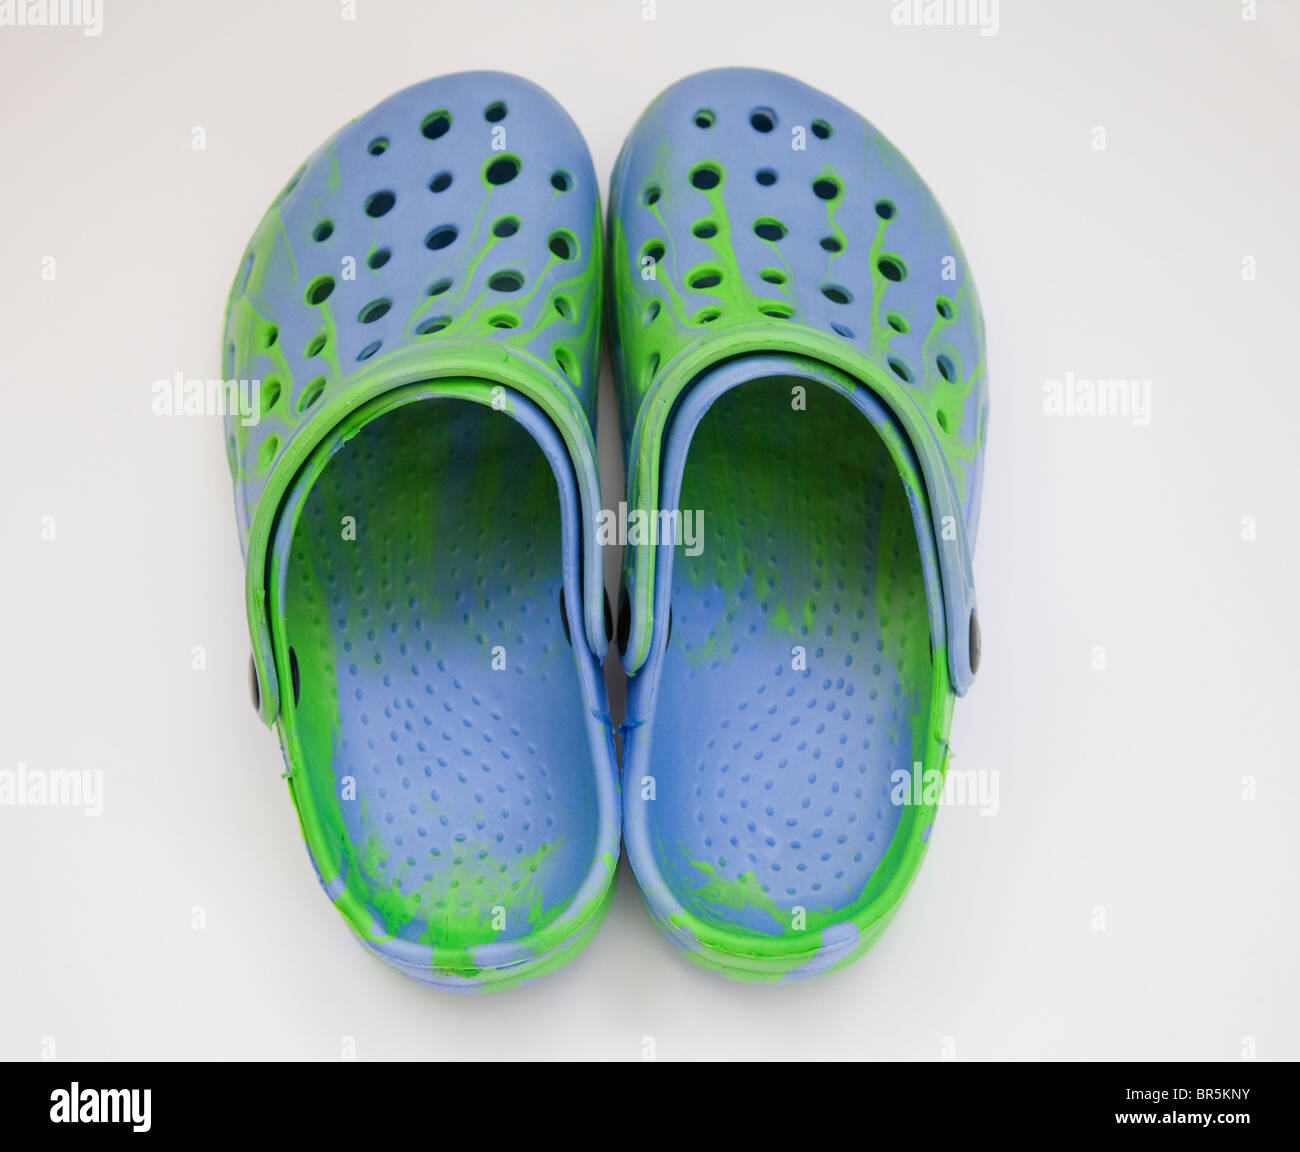 Close up pair of blue and green Croc style leisure shoes made in China  Stock Photo - Alamy